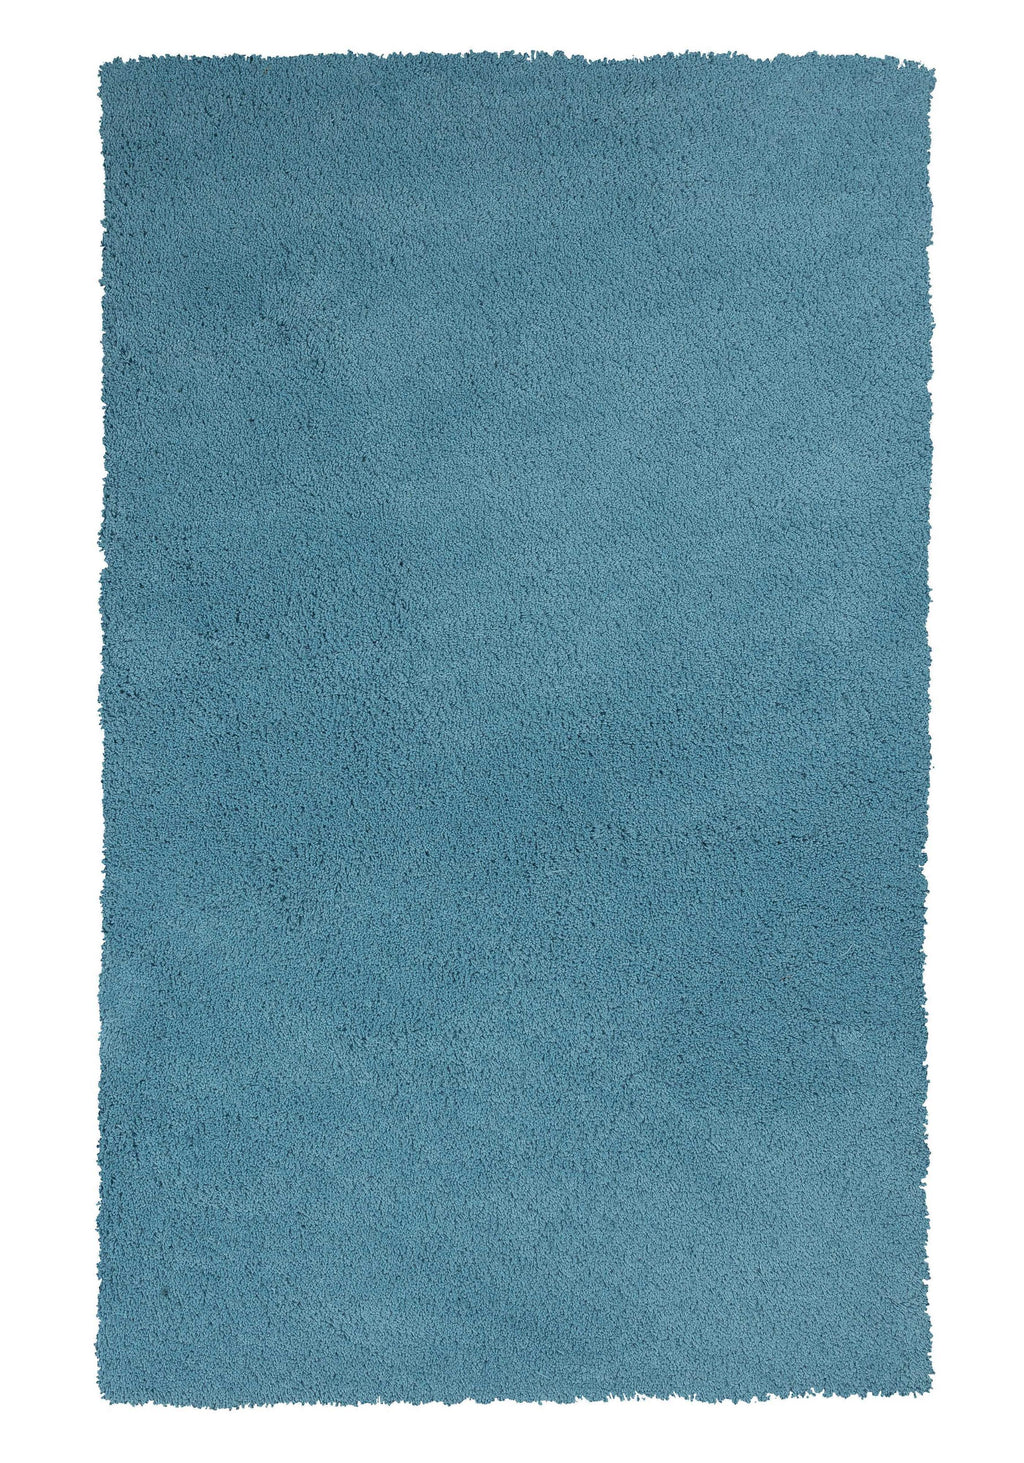 3'3" x 5'3" Polyester Highlighter Blue Area Rug